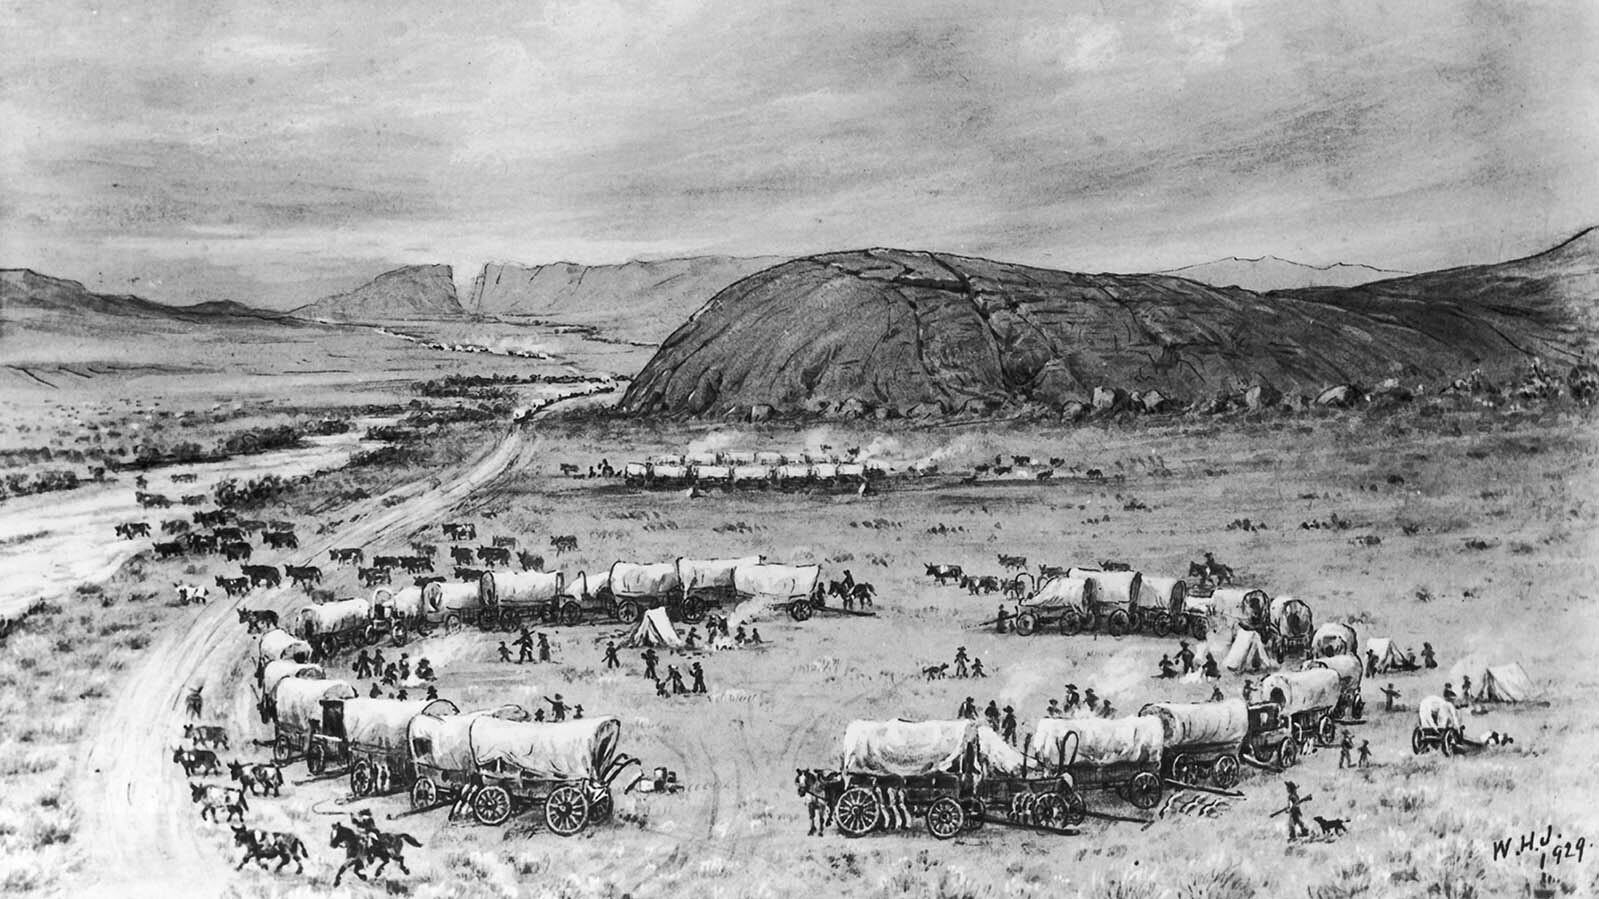 Painting by William Henry Jackson, titled "Independence Rock on the Mormon Trail" depicting numerous wagons in a field with Independence Rock in the background.